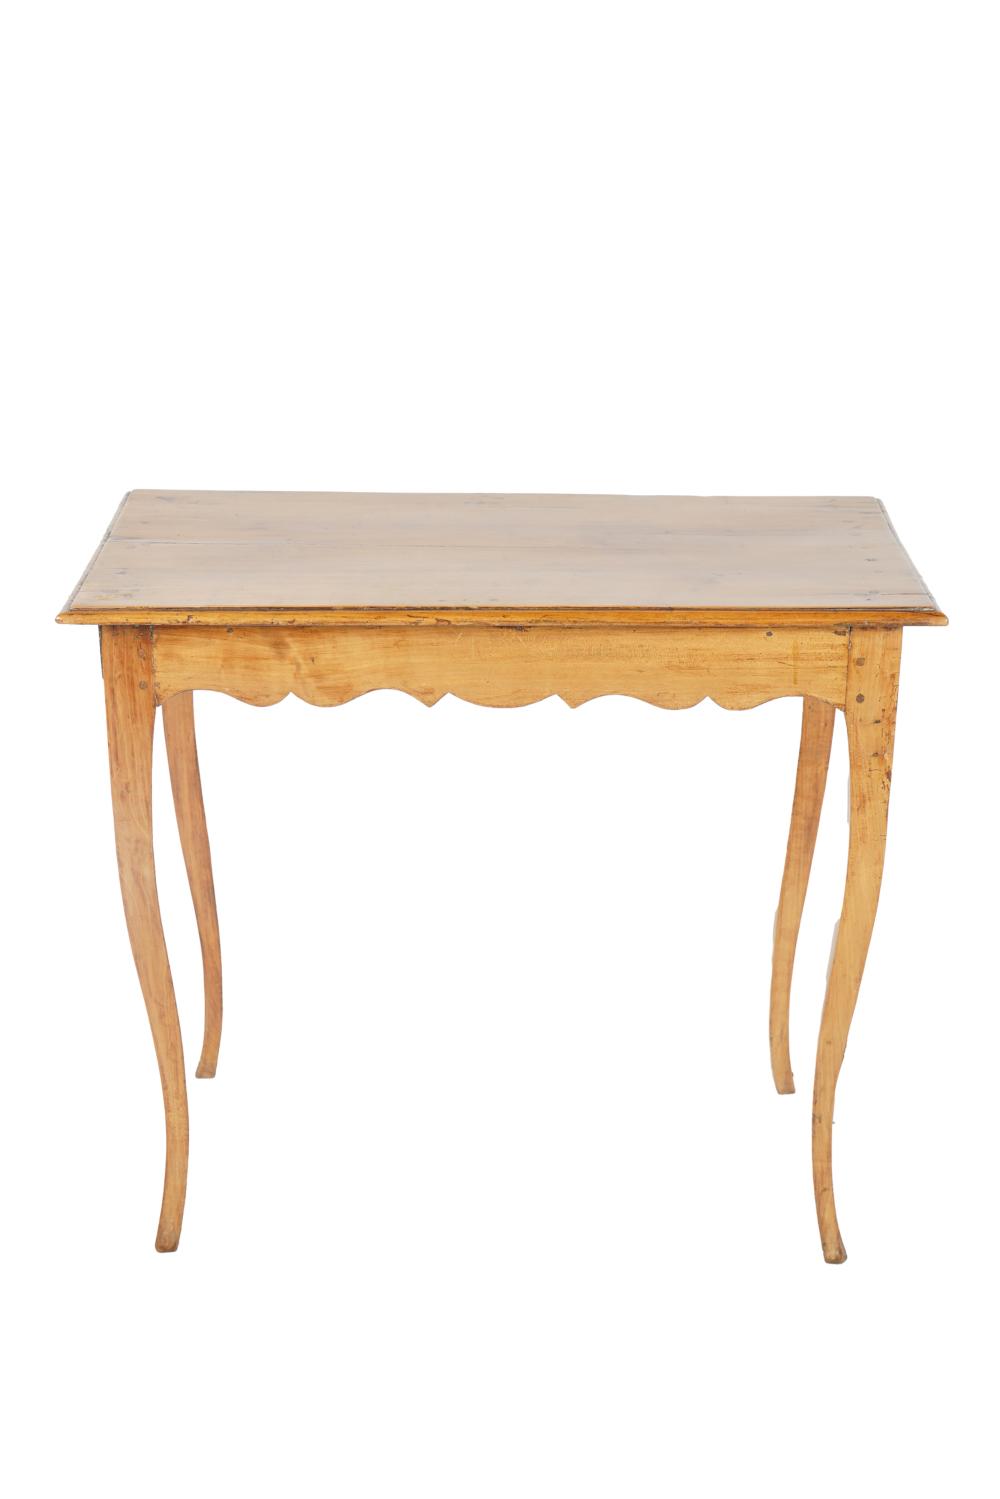 FRENCH PROVINCIAL FRUITWOOD OCCASIONAL